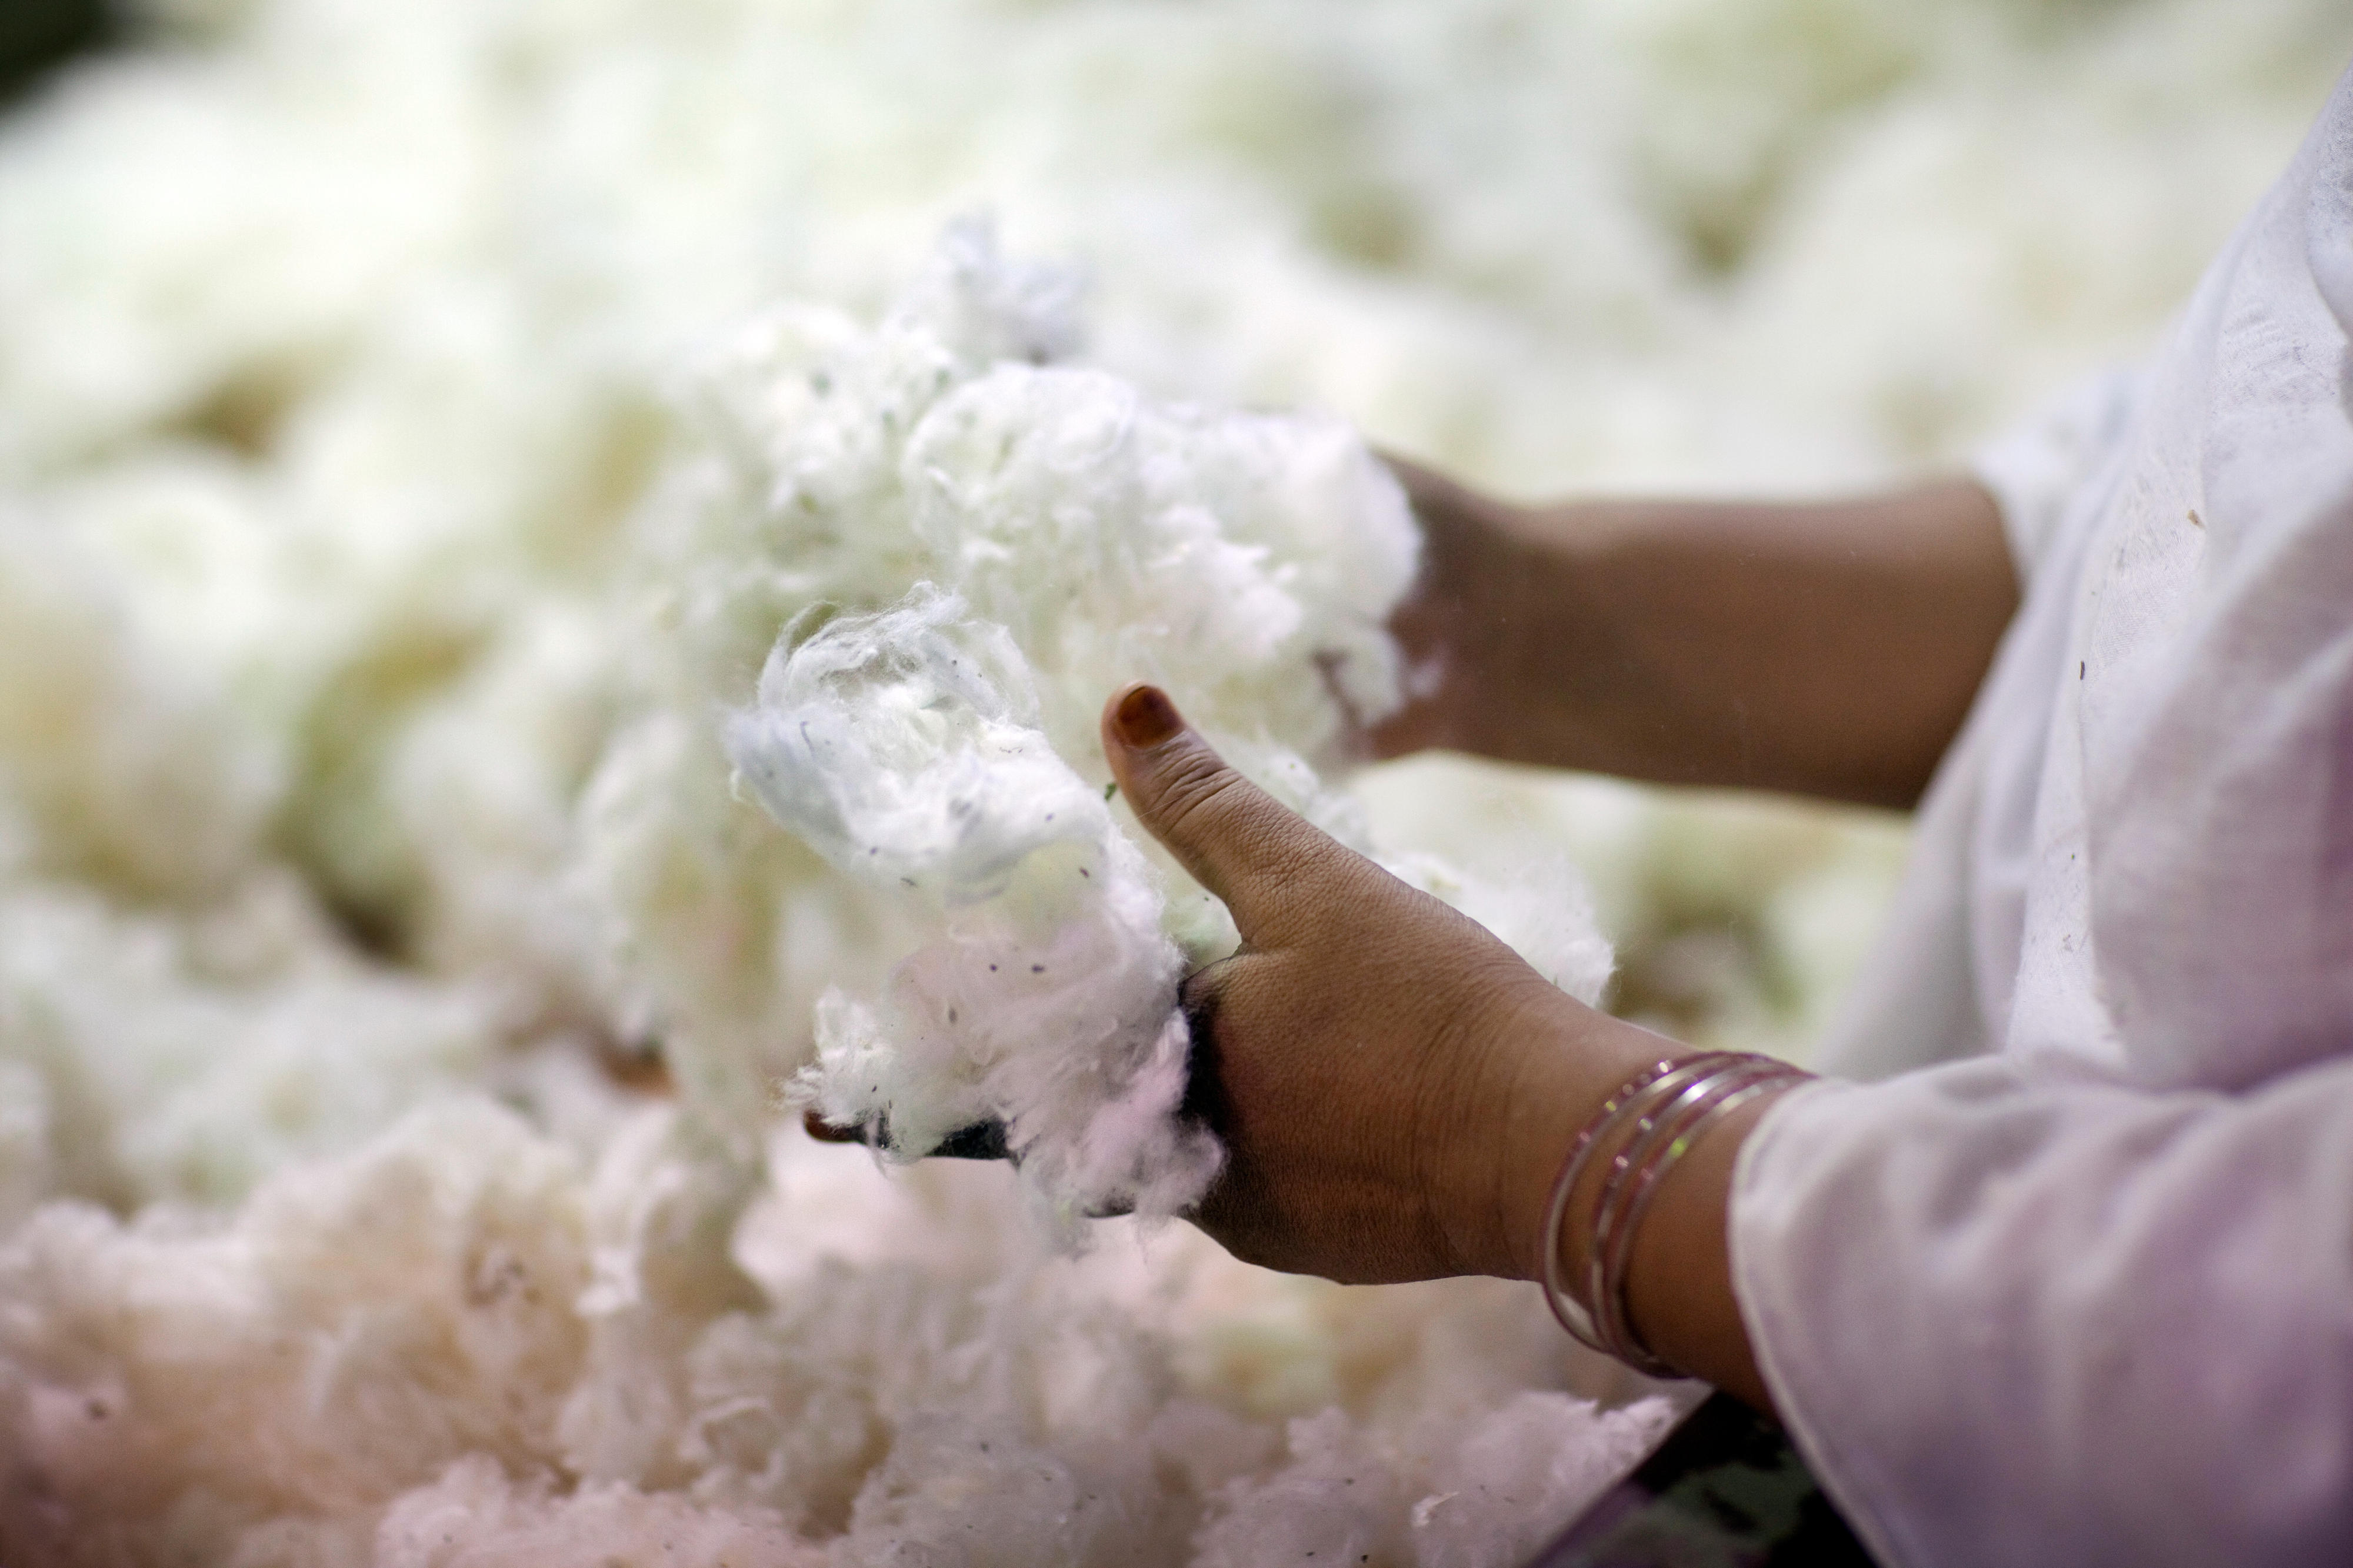 In a textile factory in Faisalabad, Pakistan, cotton is tested for impurities.